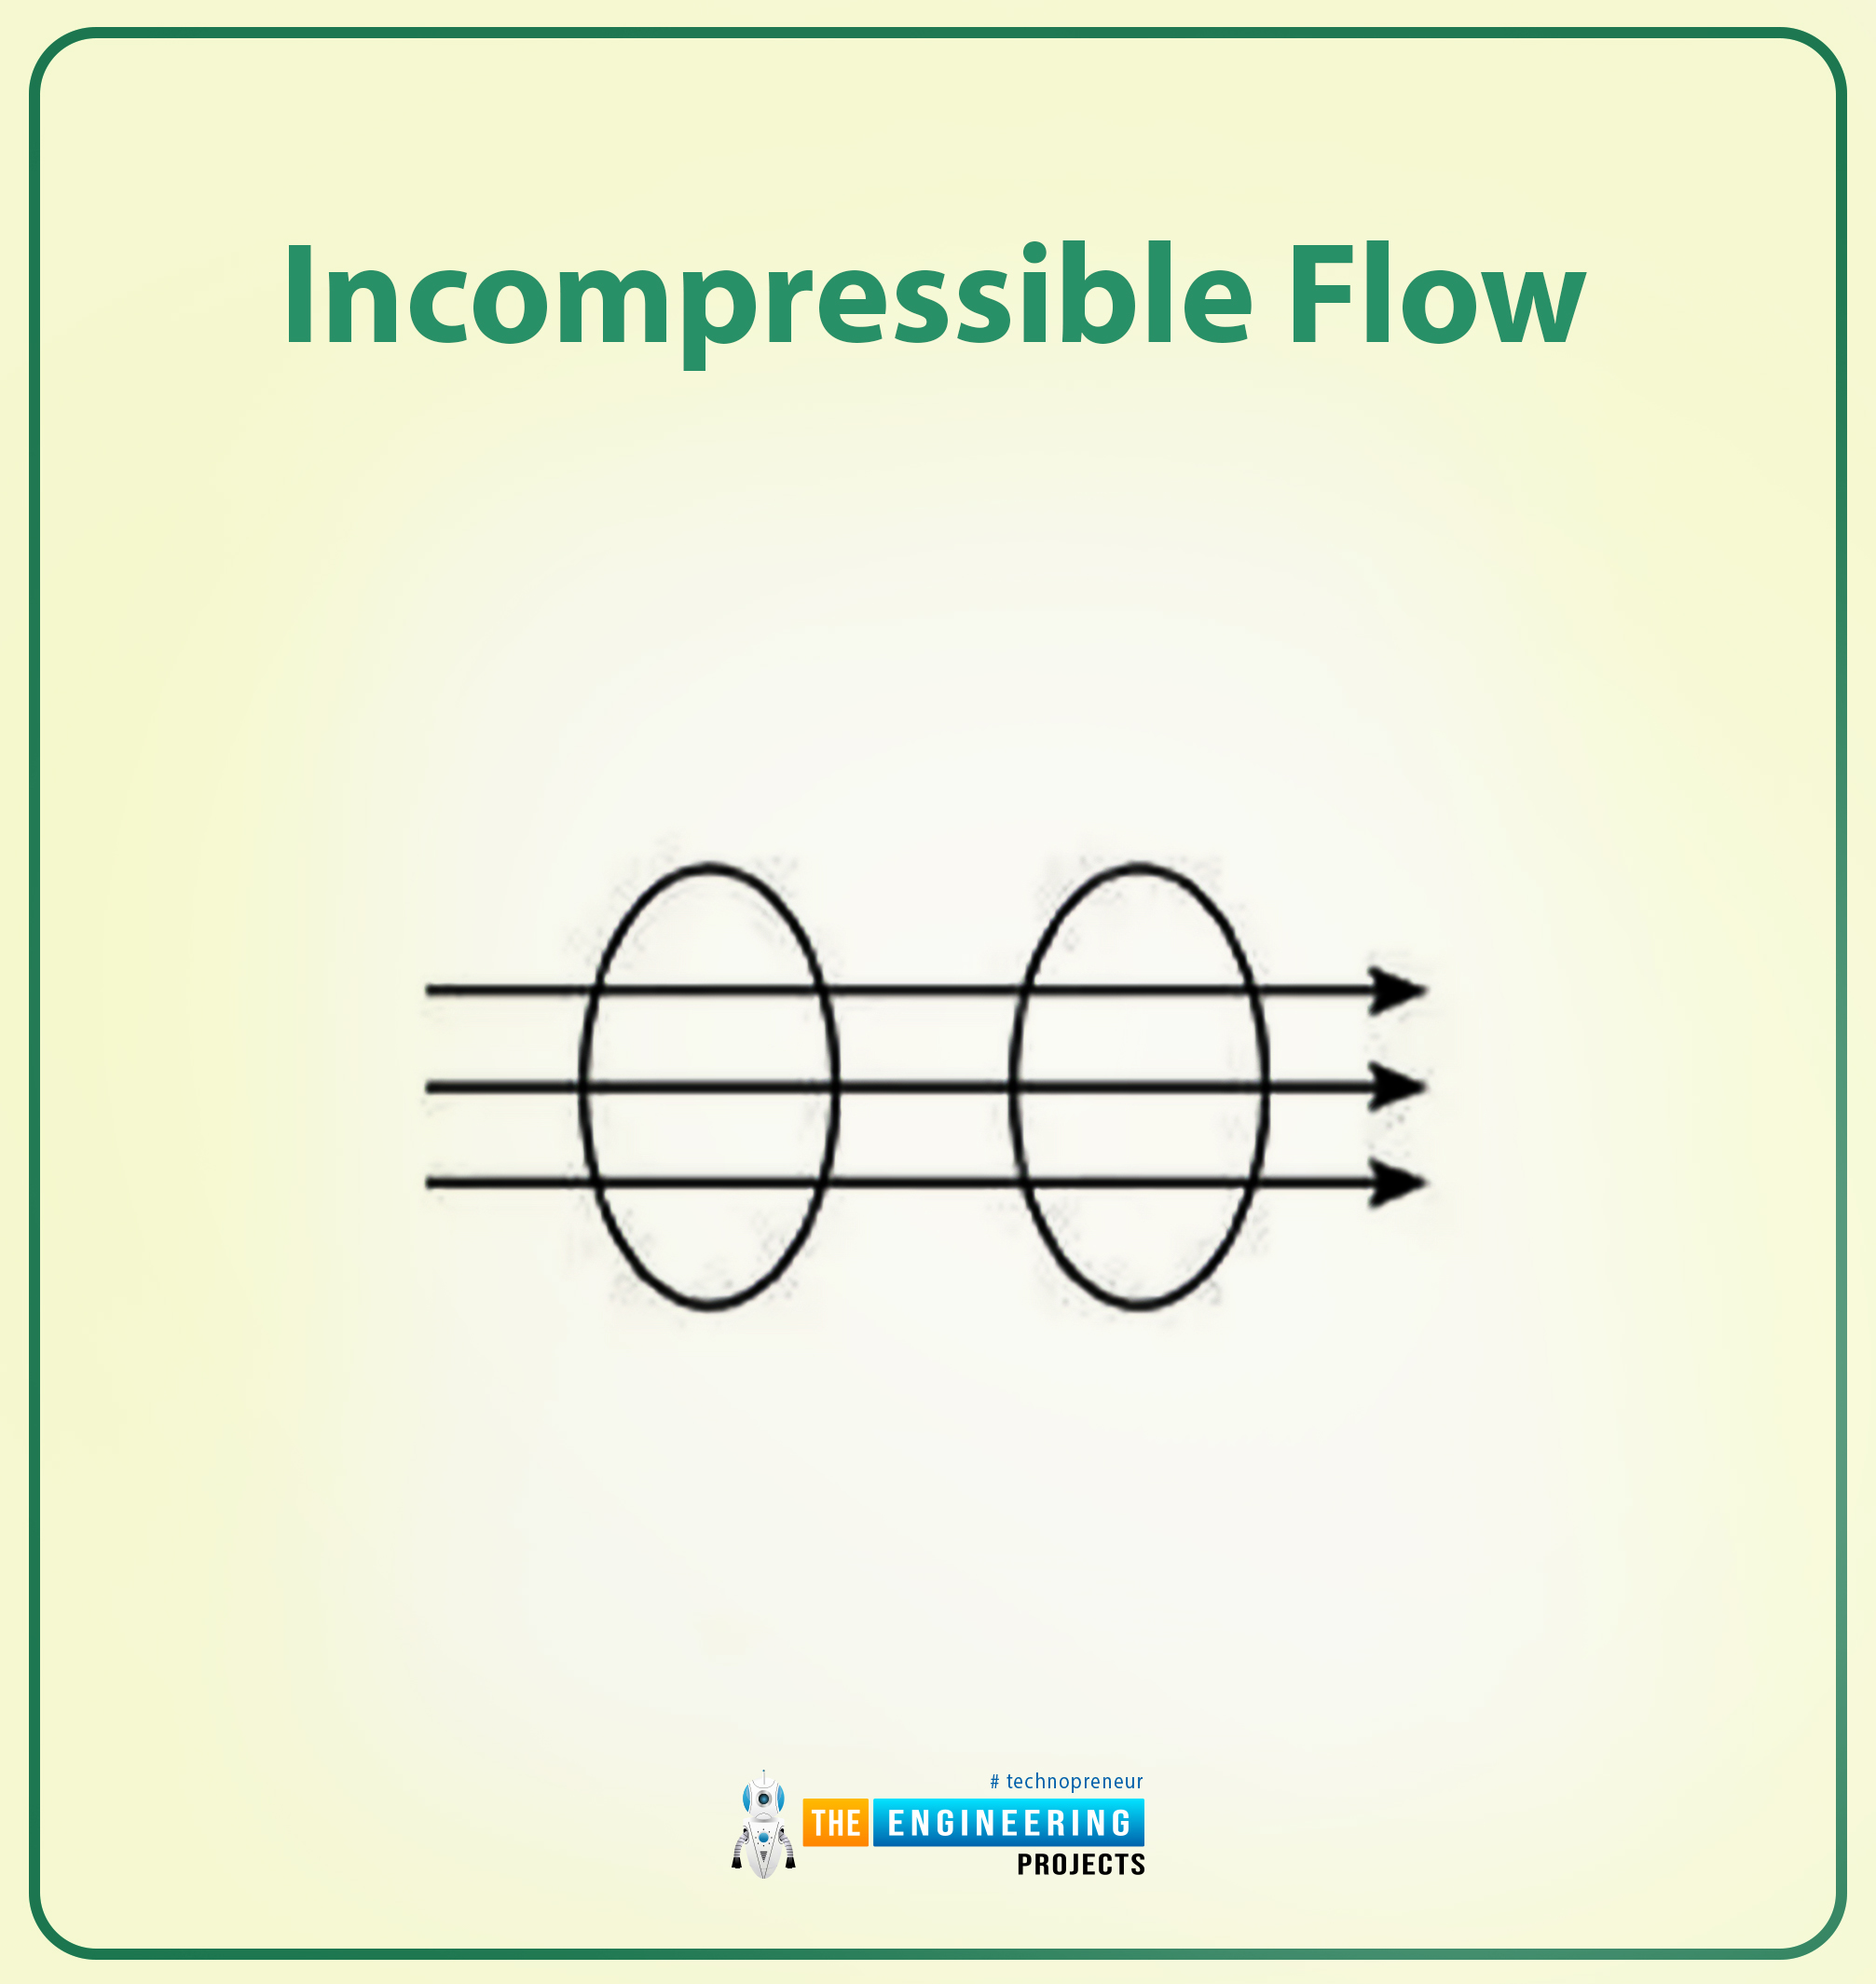 Types of flow, types of fluid flow, Steady and Unsteady Flow, Uniform and Non-Uniform Flow, One, two and three-dimensional Flow, Rotational or Irrotational Flow, Laminar and Turbulent, Compressible and Incompressible Flow